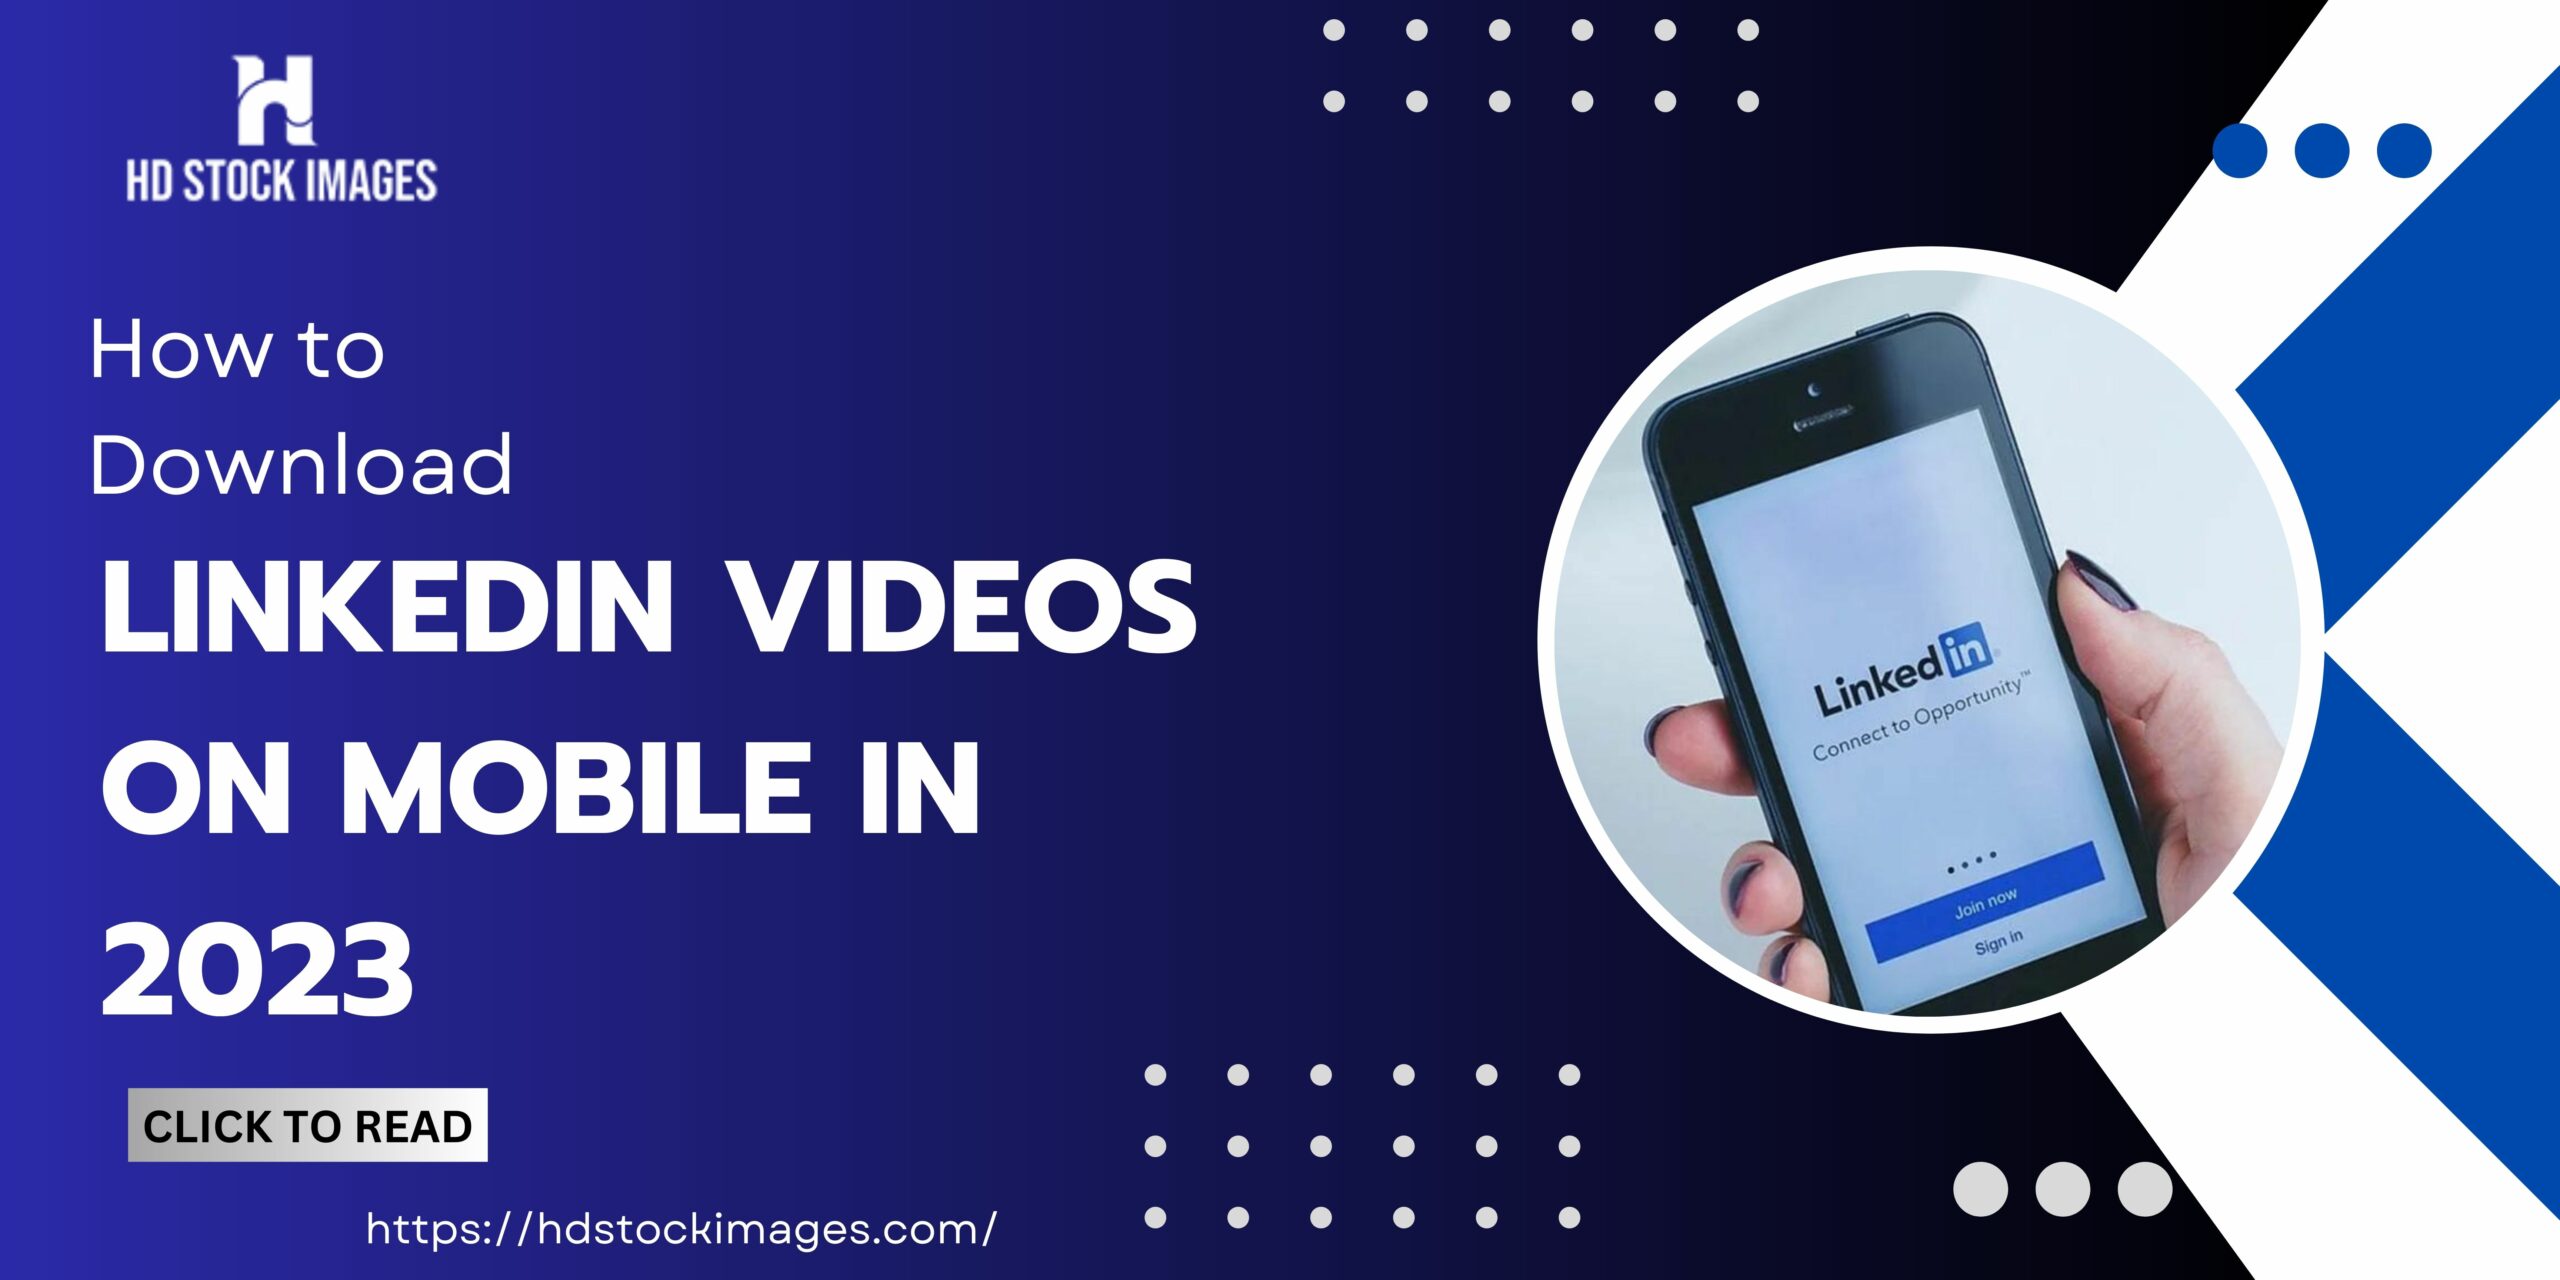 How to Download LinkedIn Videos on Mobile in 2023